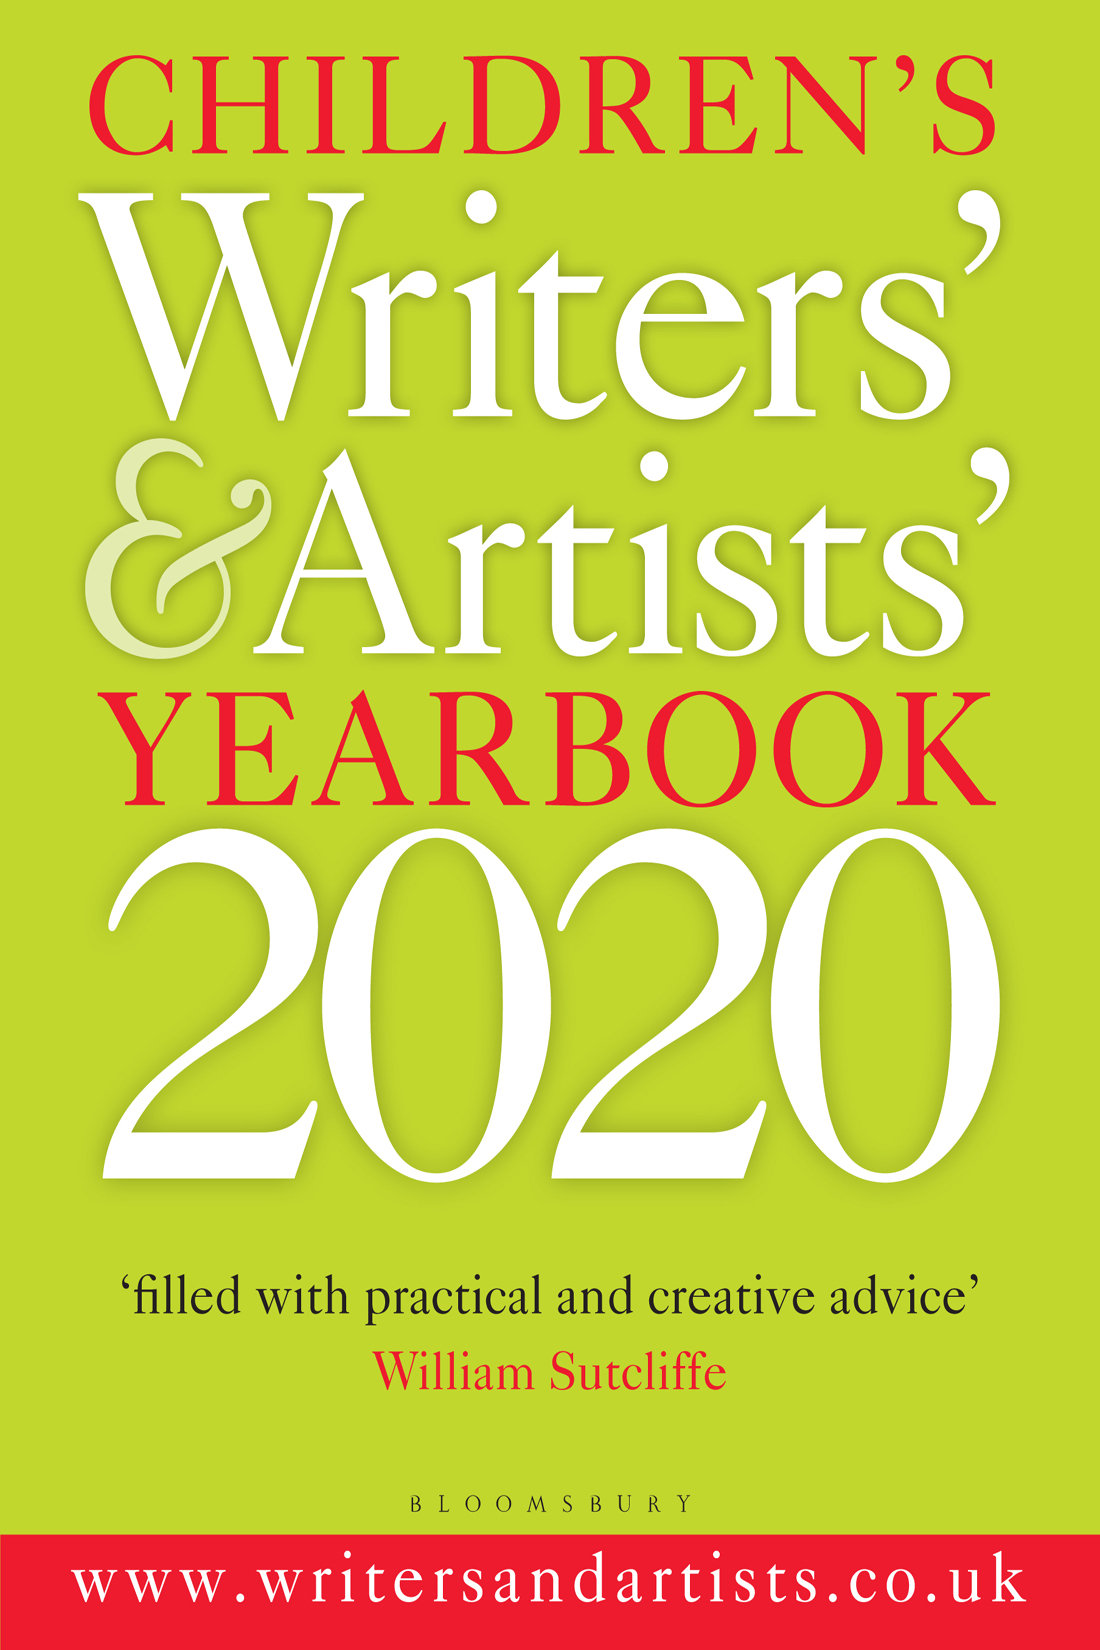 Childrens Writers Artists Yearbook 2020 Other Writers Artists titles - photo 1